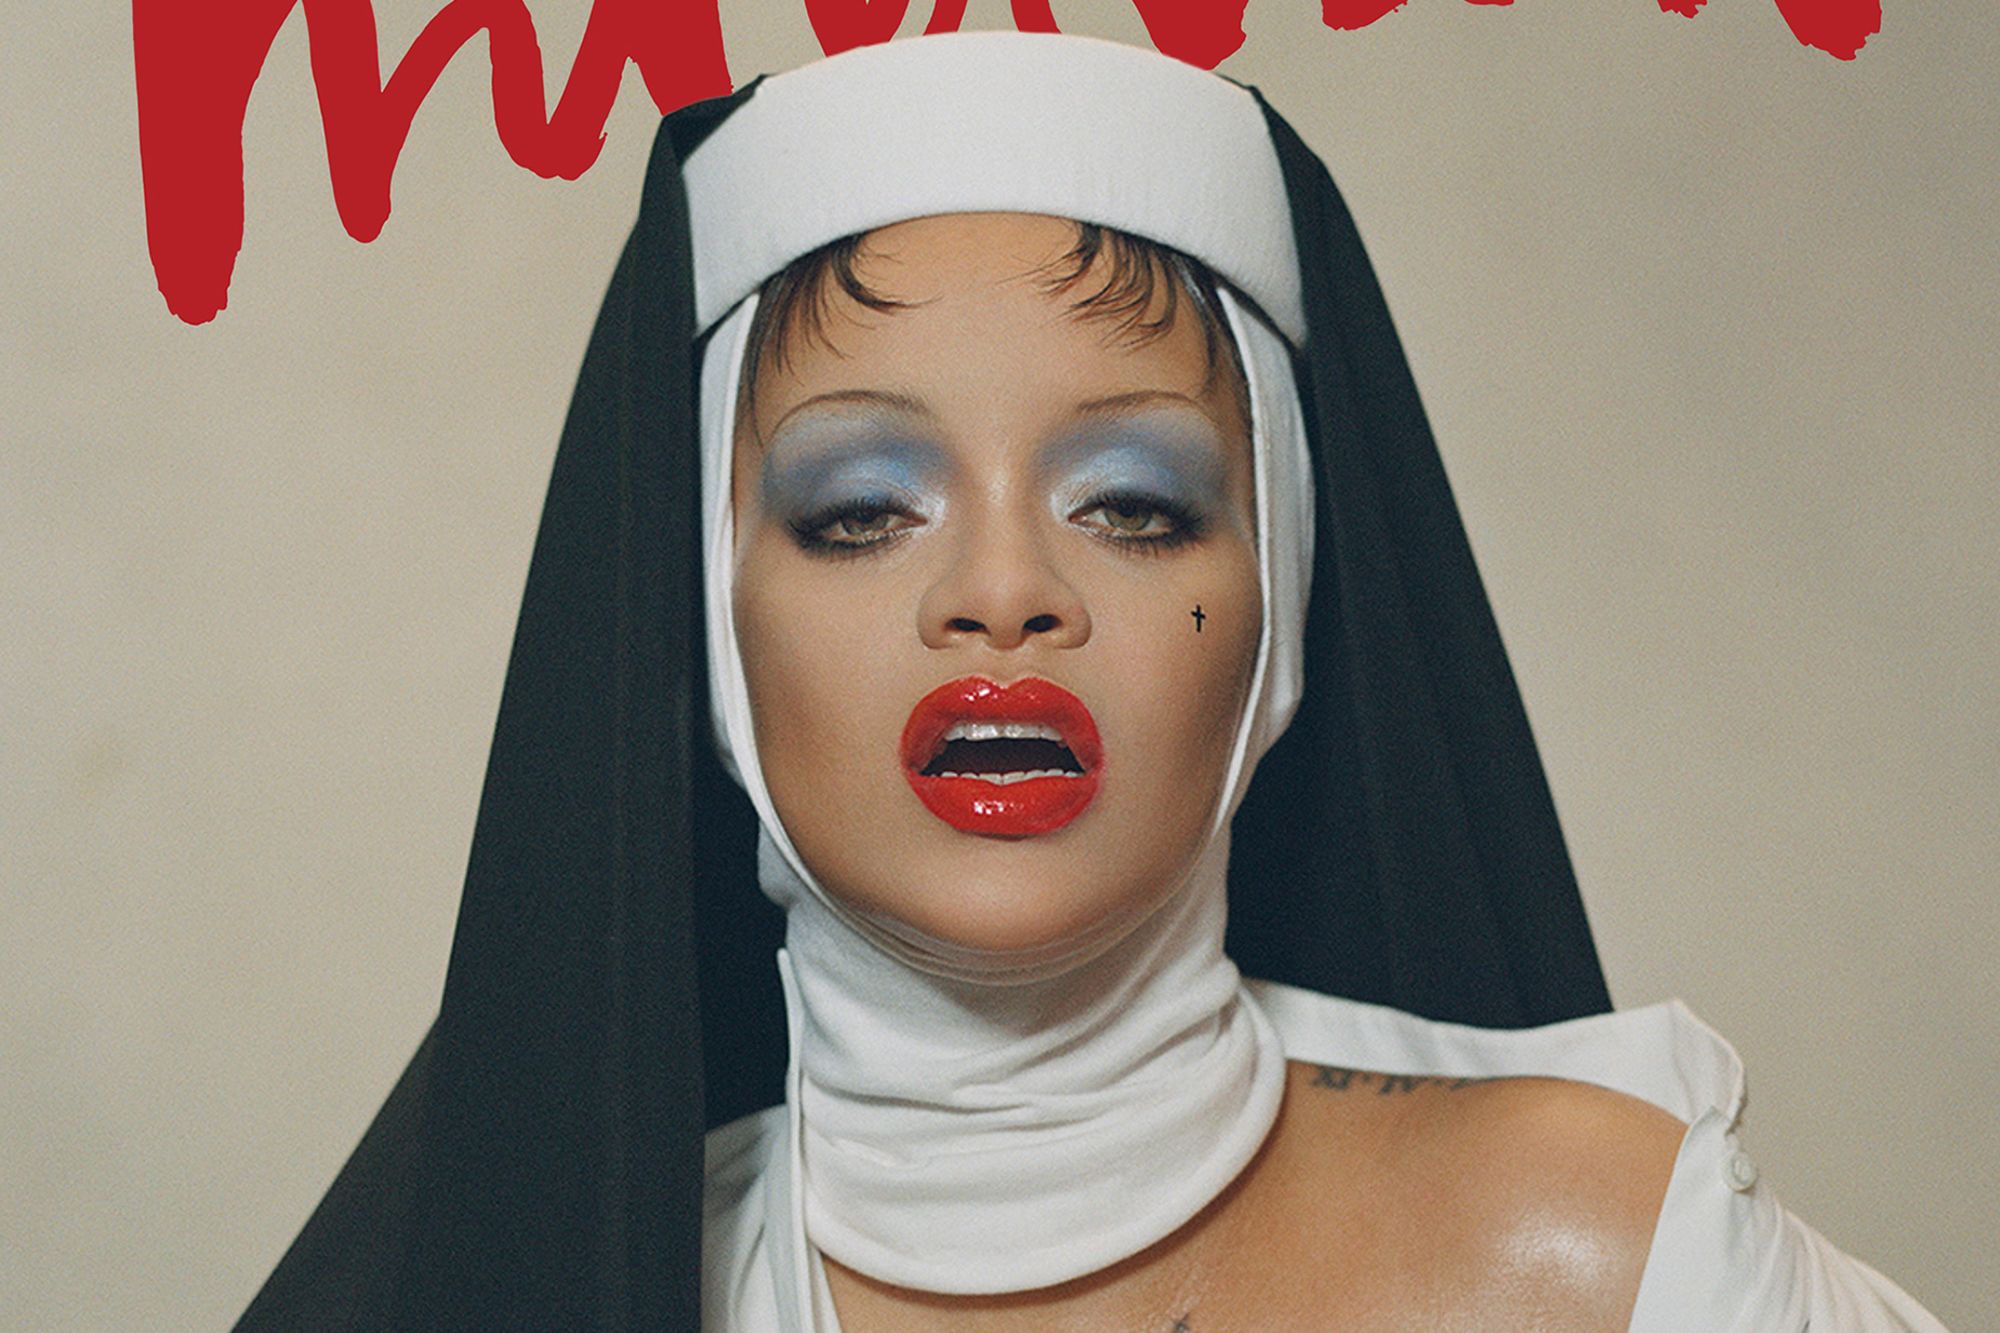 Rihanna is gracing the new cover of Interview magazine, dressed in a skin-baring Dior shirt and a custom wimple from milliner Sarah Sokol.